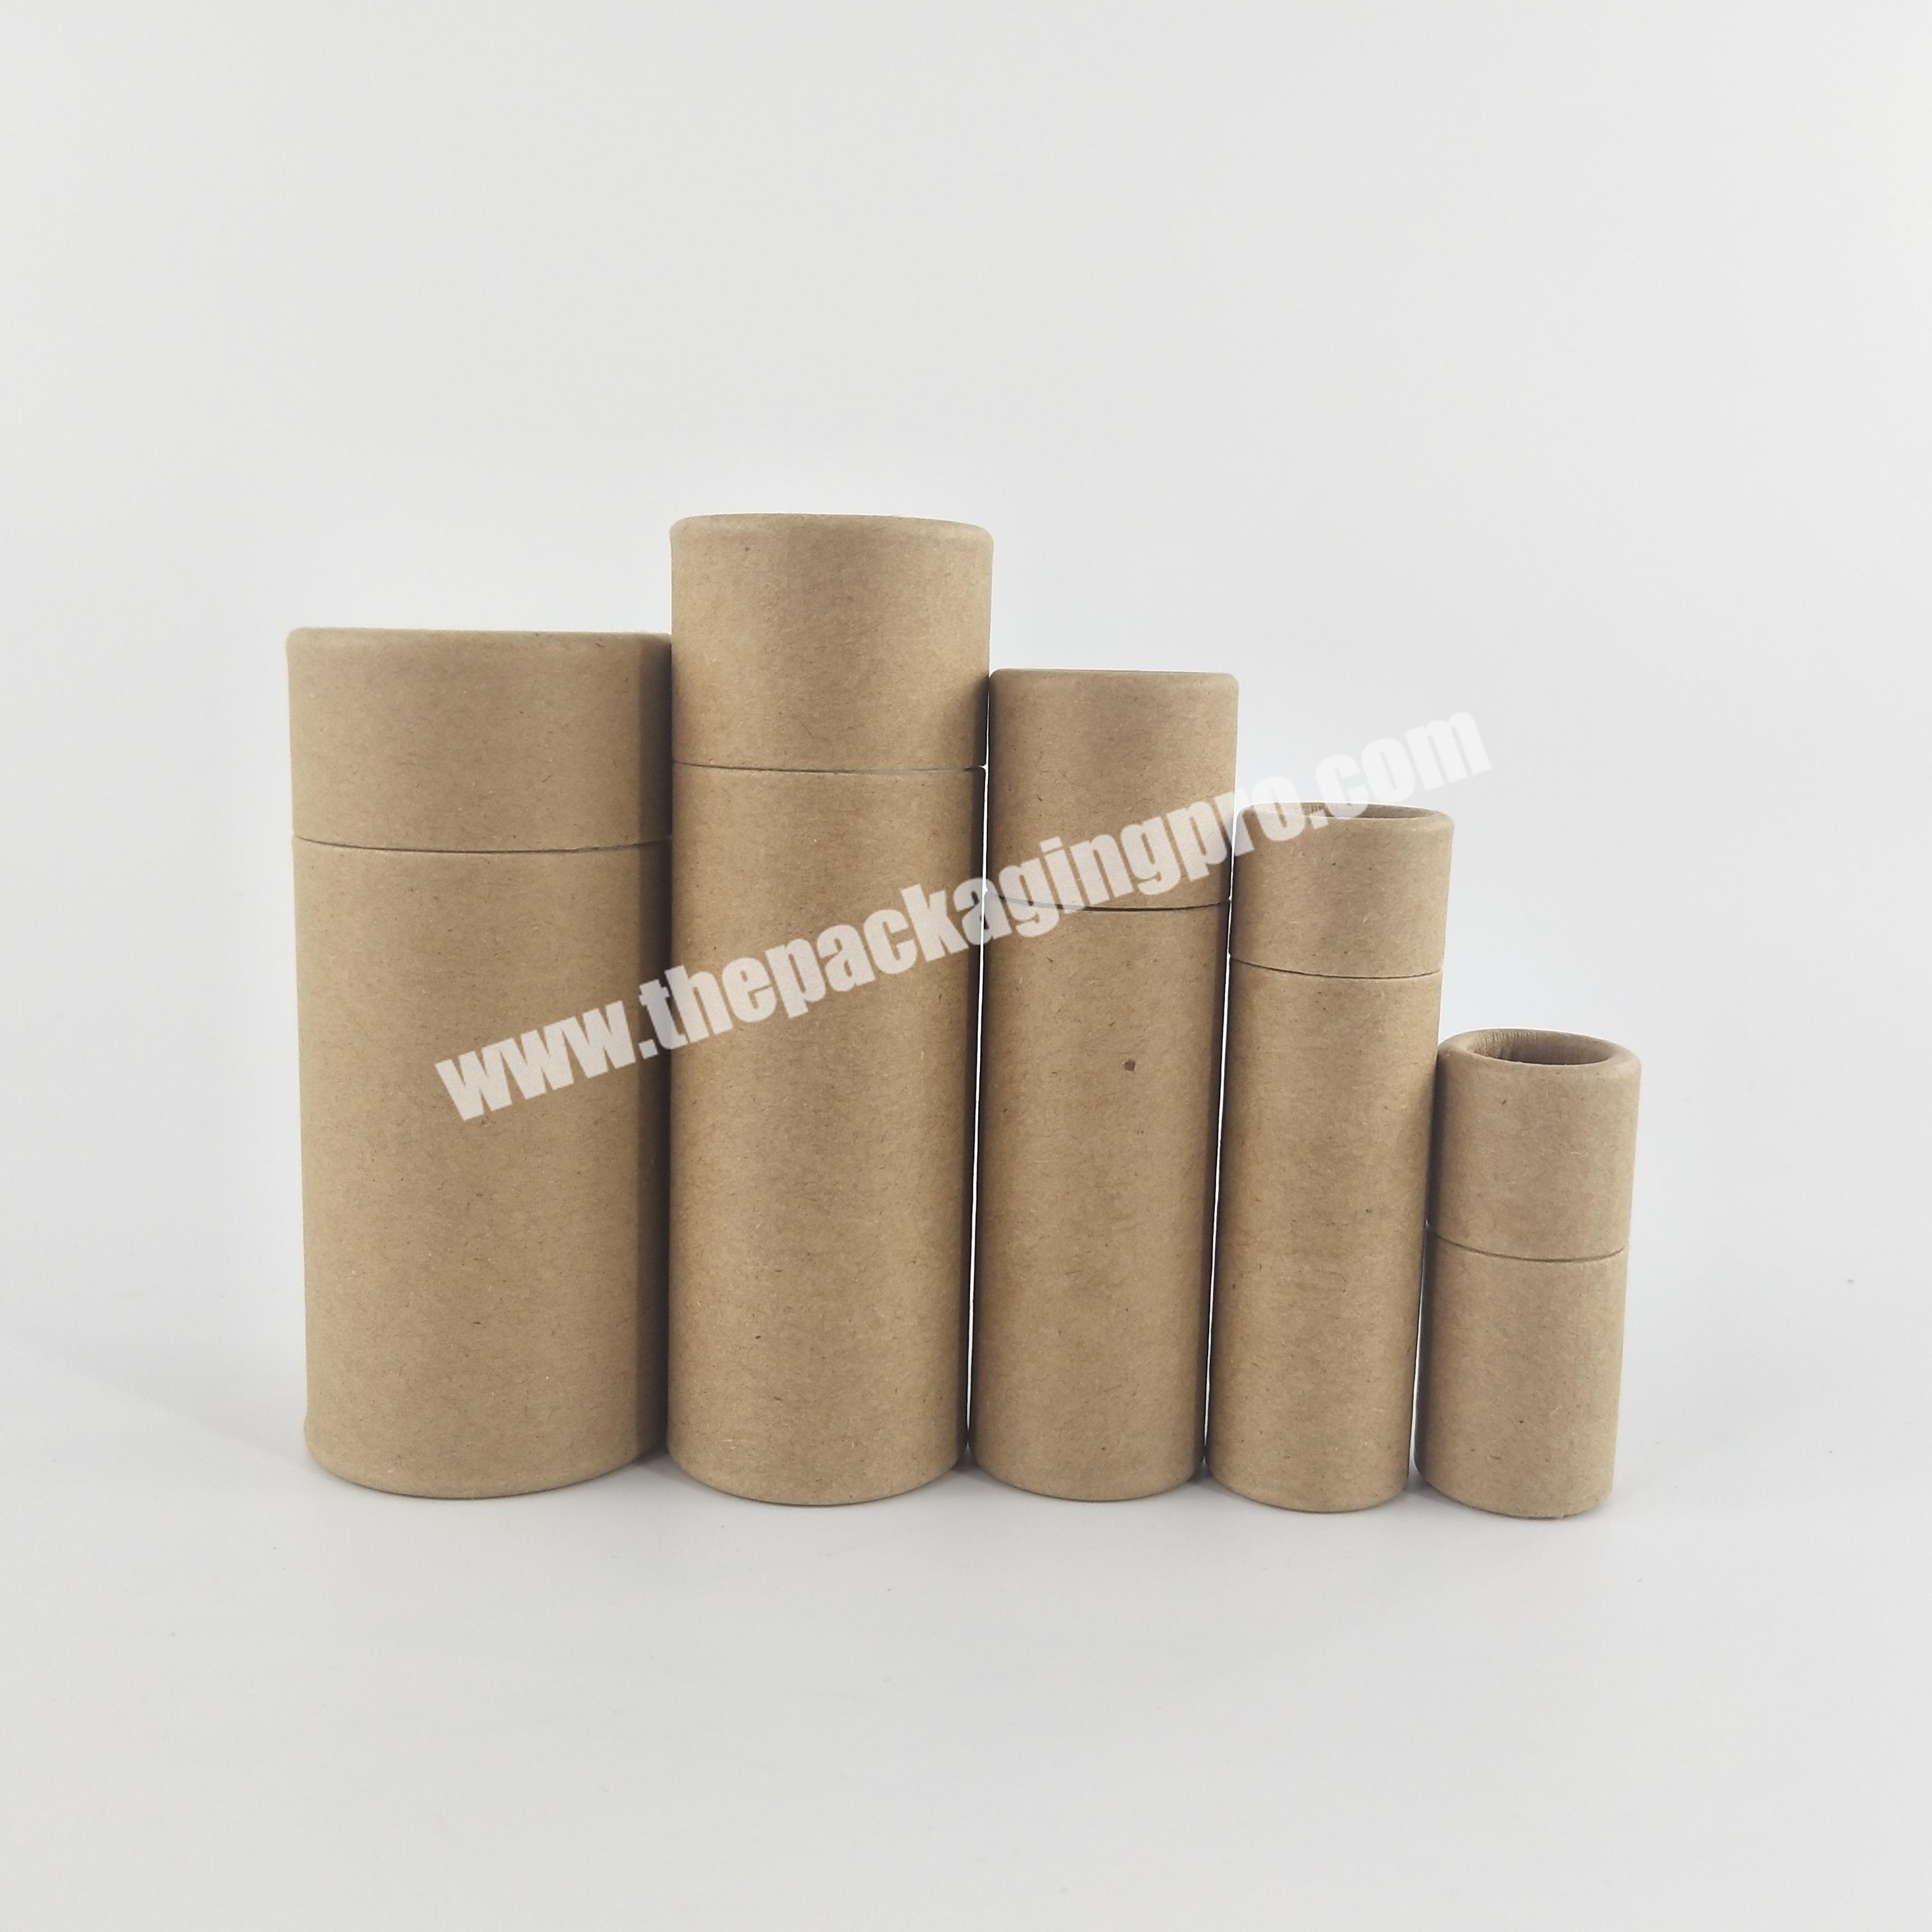 100% biodegradable packaging cardboard push up deodorant stick containers white black brown kraft lip balm paper tube